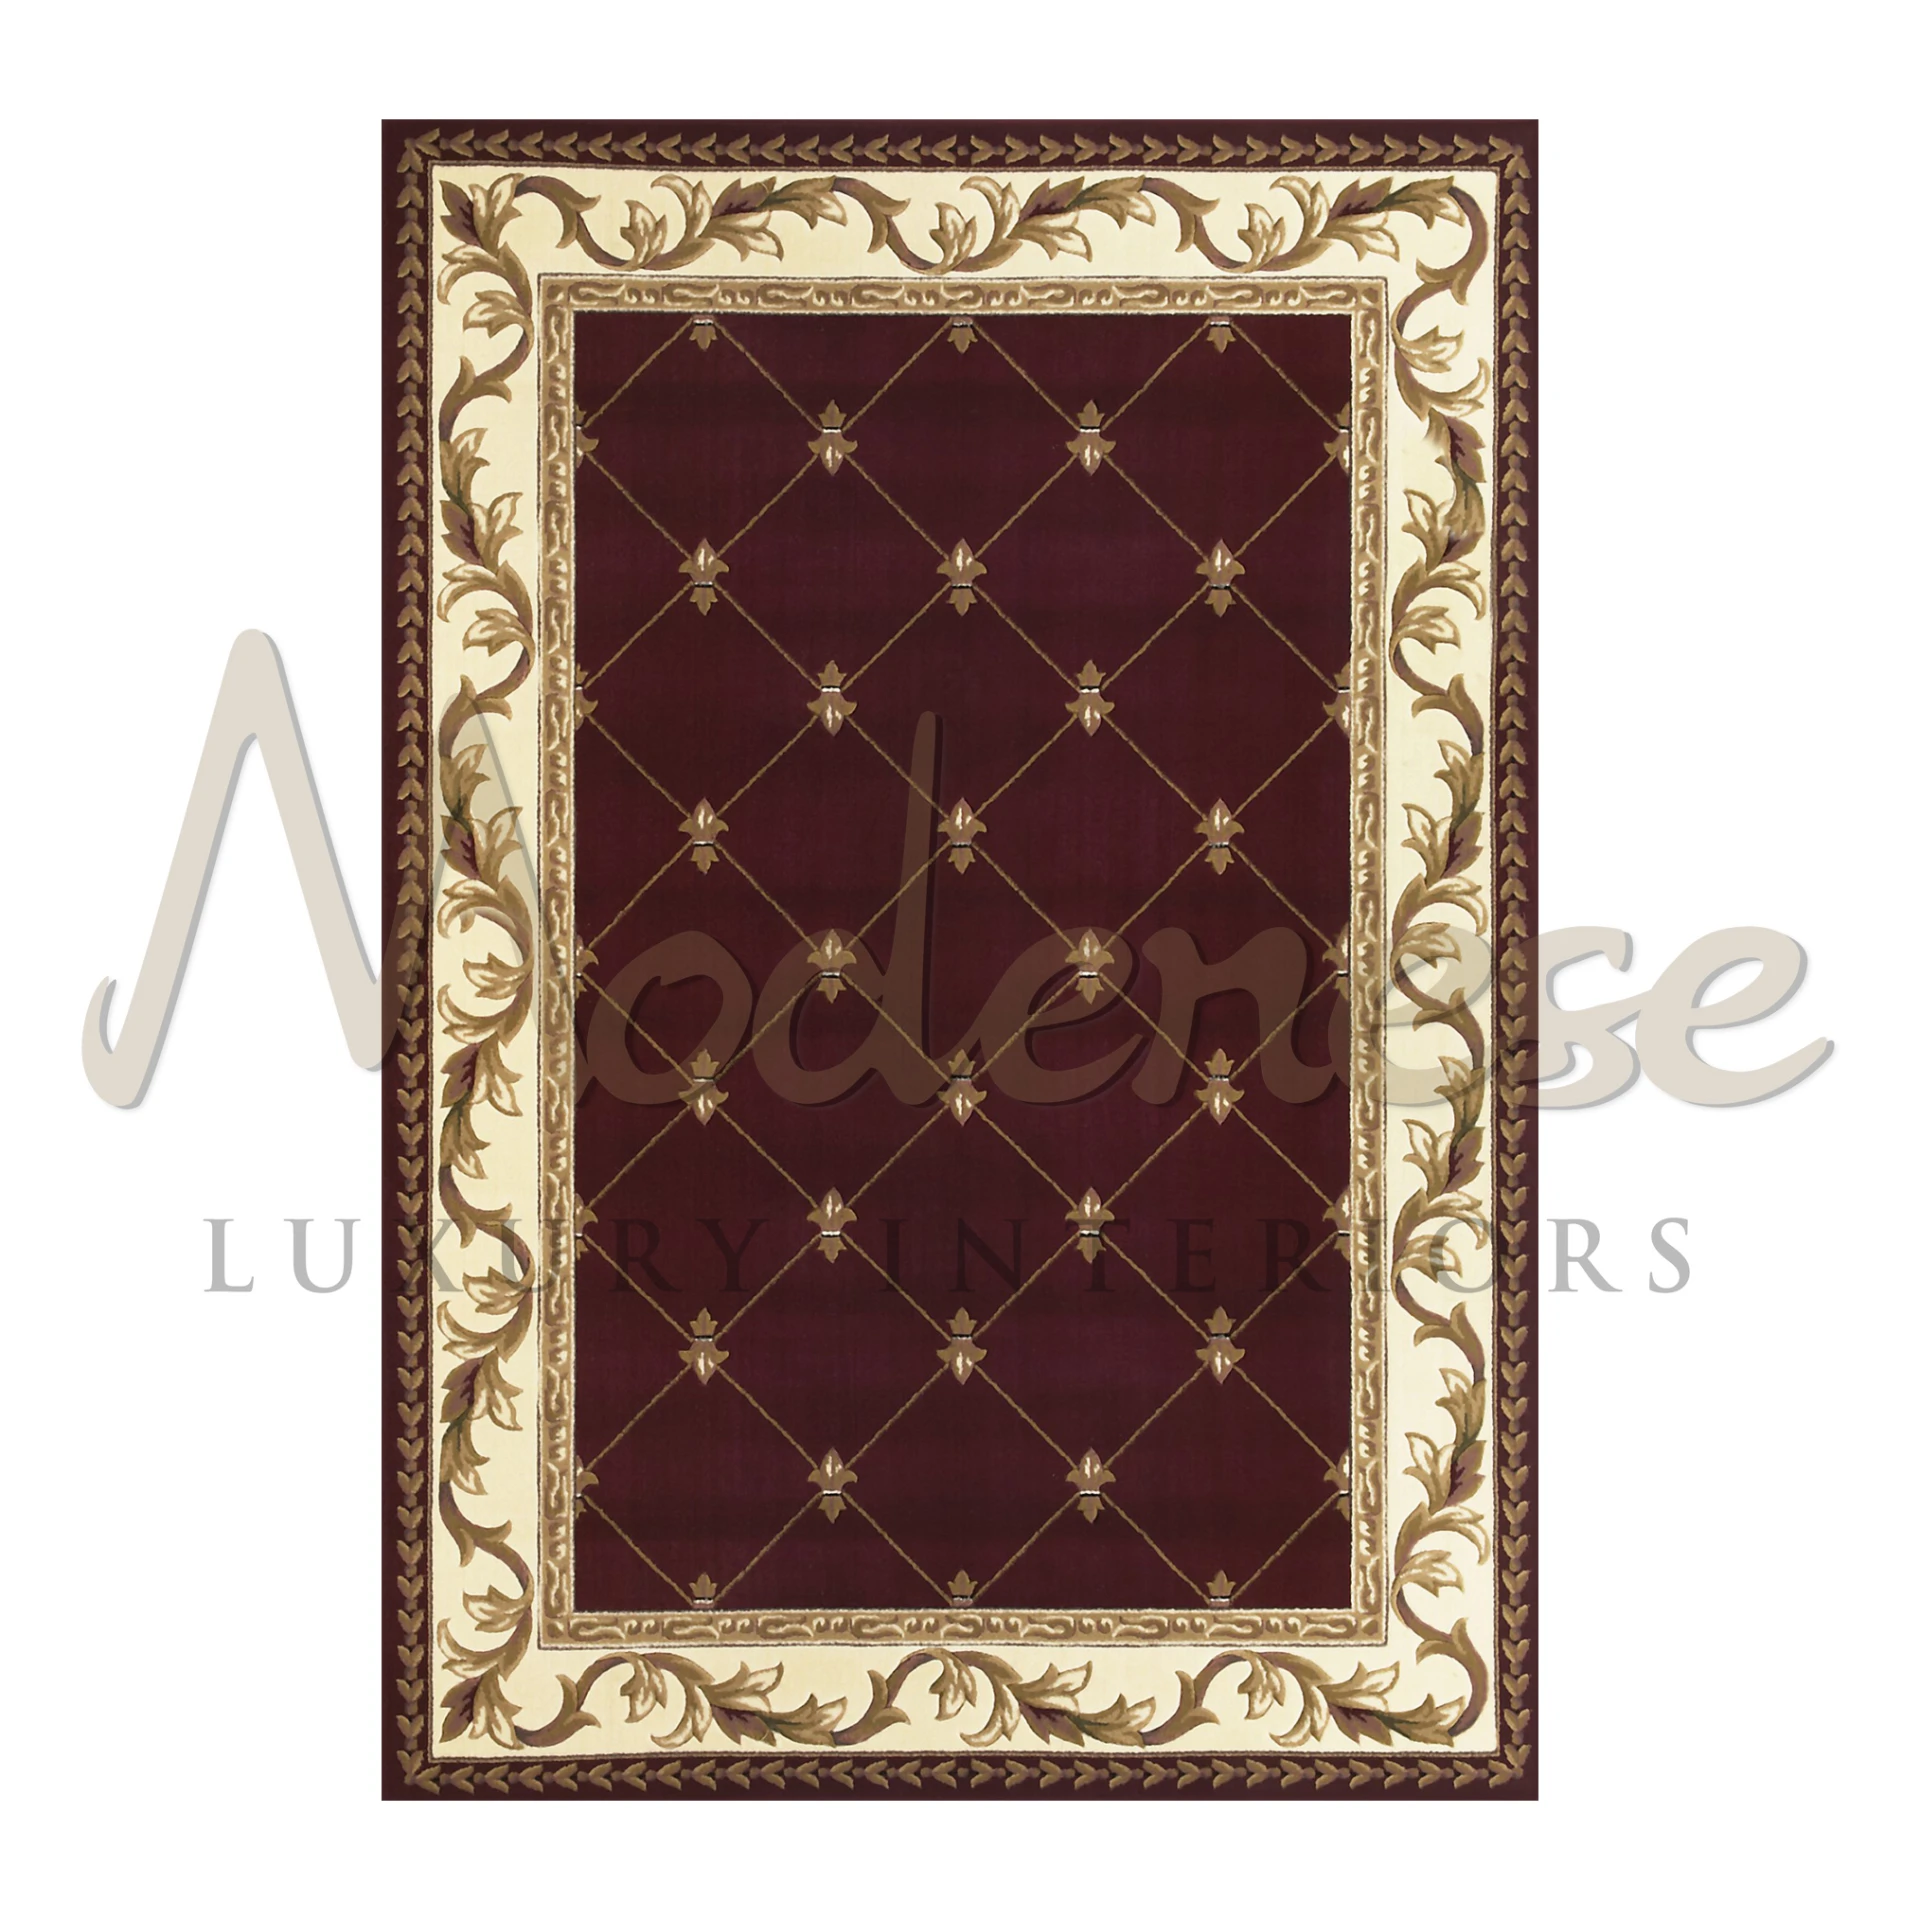 Burgundy Royal Heritage Rug for luxury classica palaces